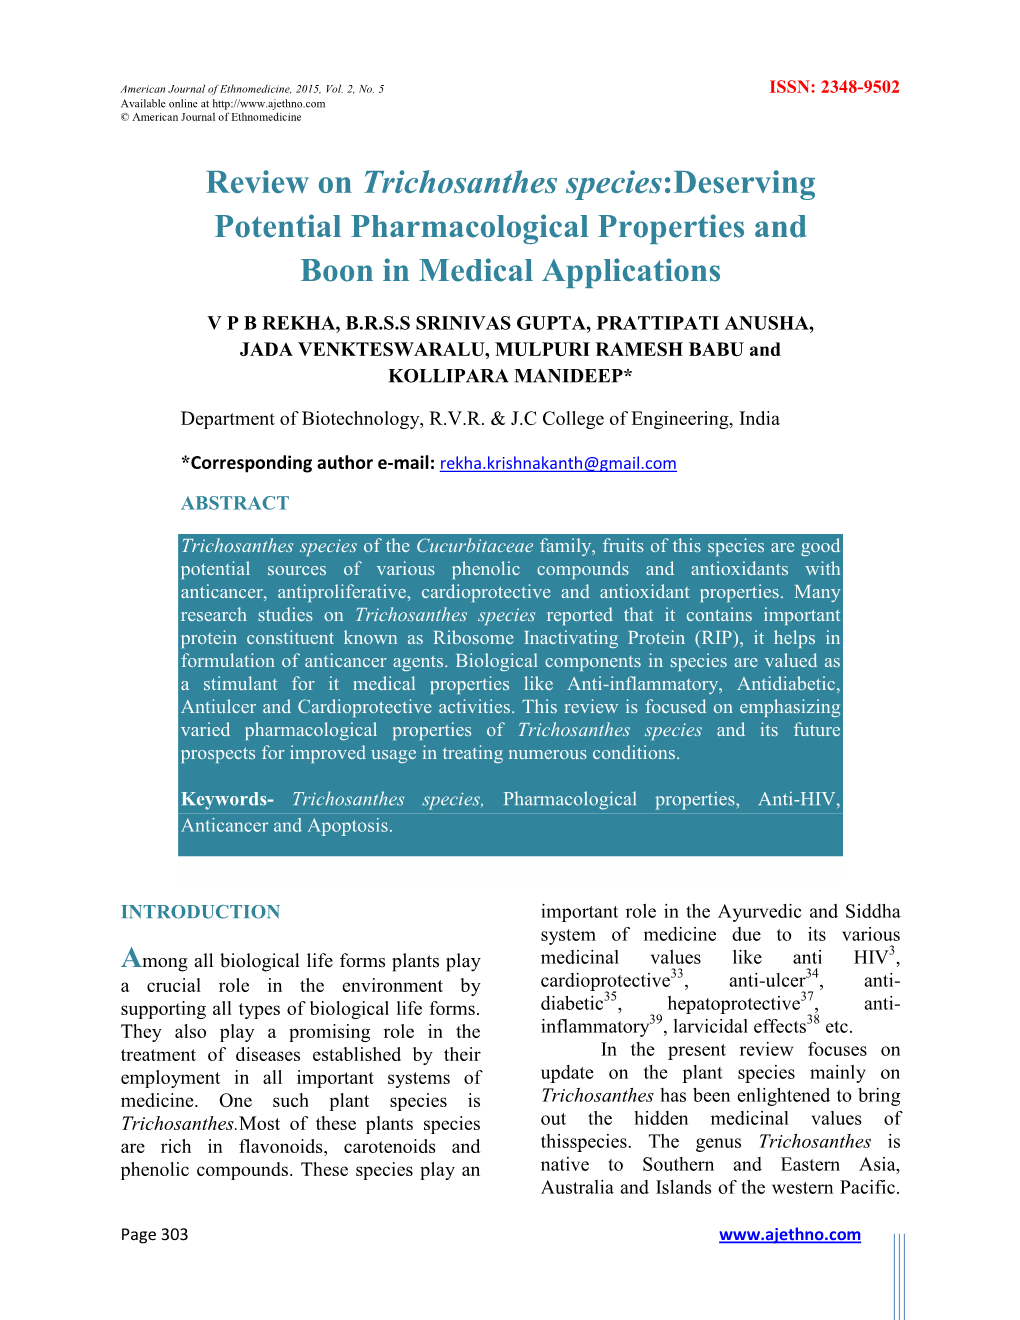 Review on Trichosanthes Species:Deserving Potential Pharmacological Properties and Boon in Medical Applications